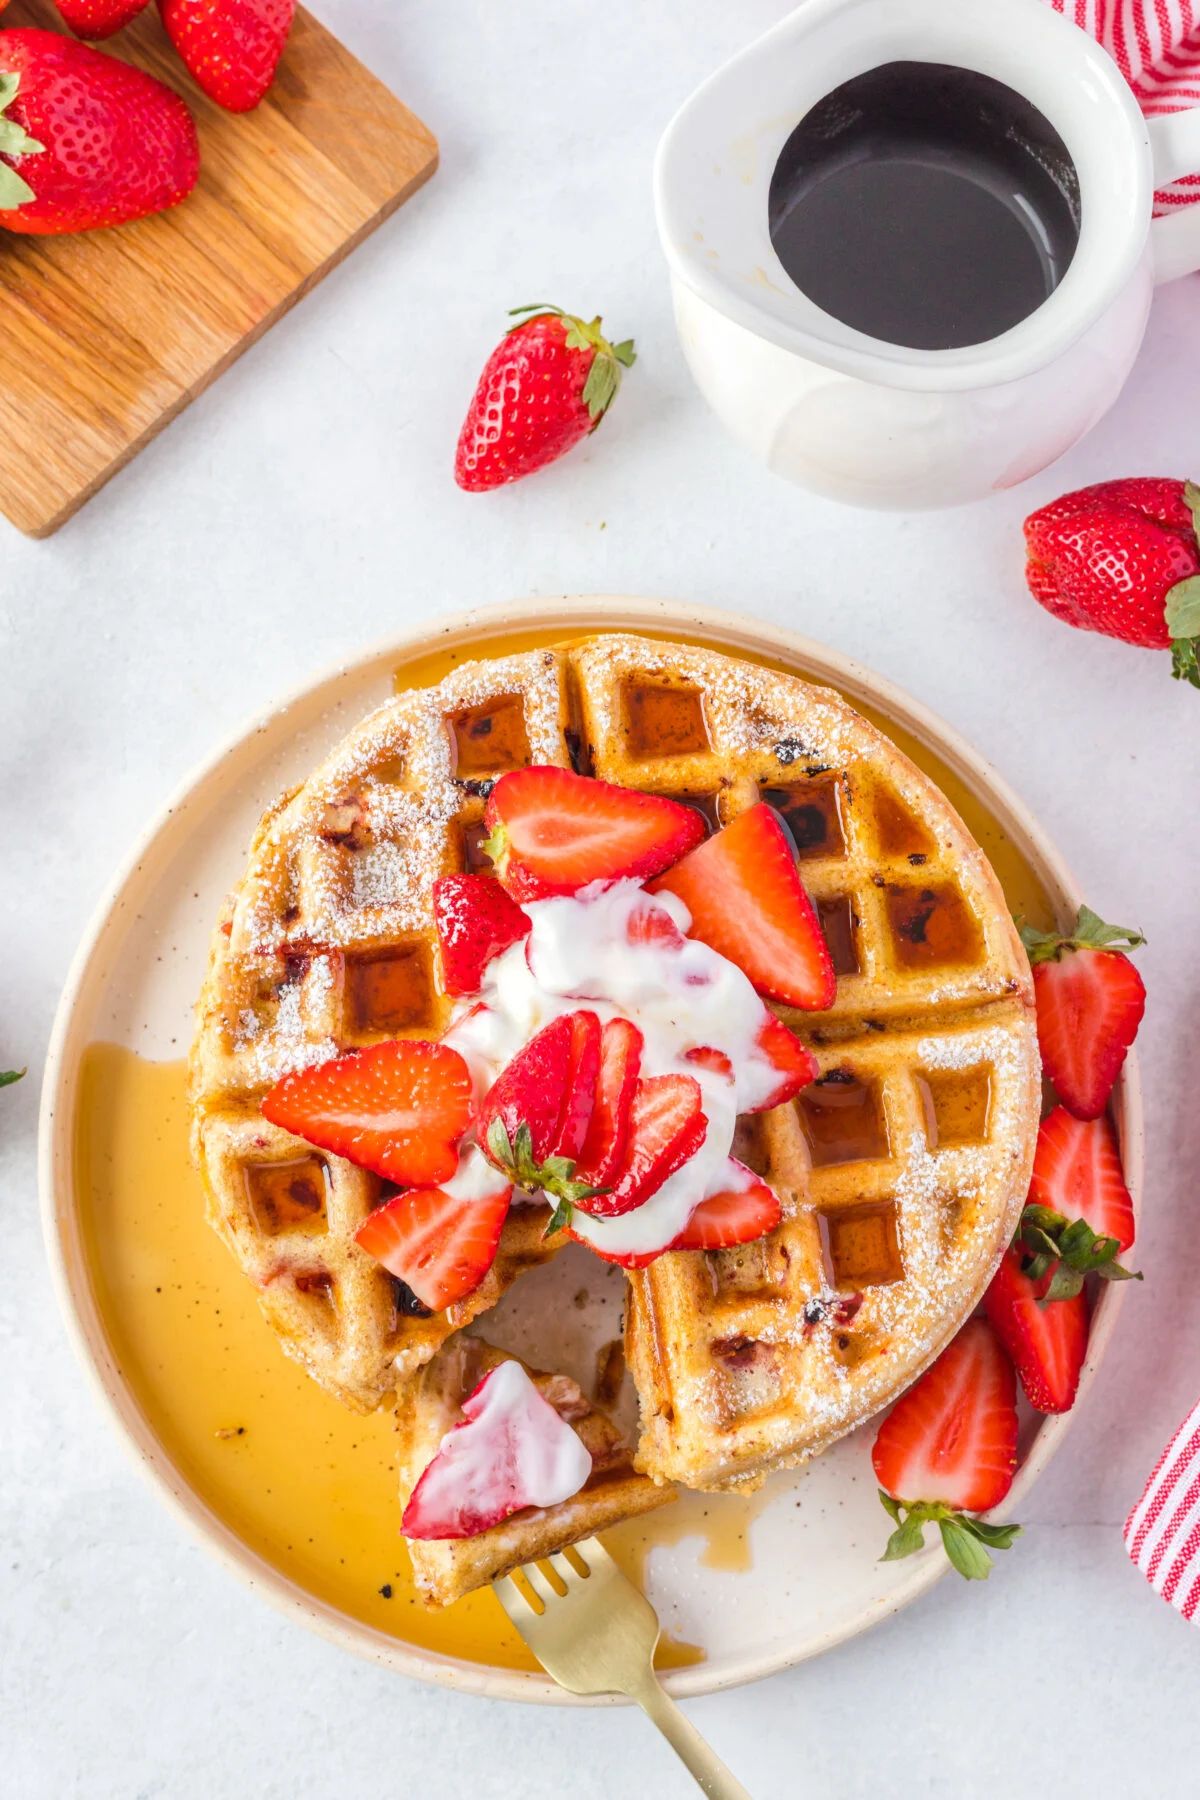 This recipe makes homemade strawberry waffles that are light, fluffy, and loaded with fresh strawberries. The perfect weekend breakfast treat!